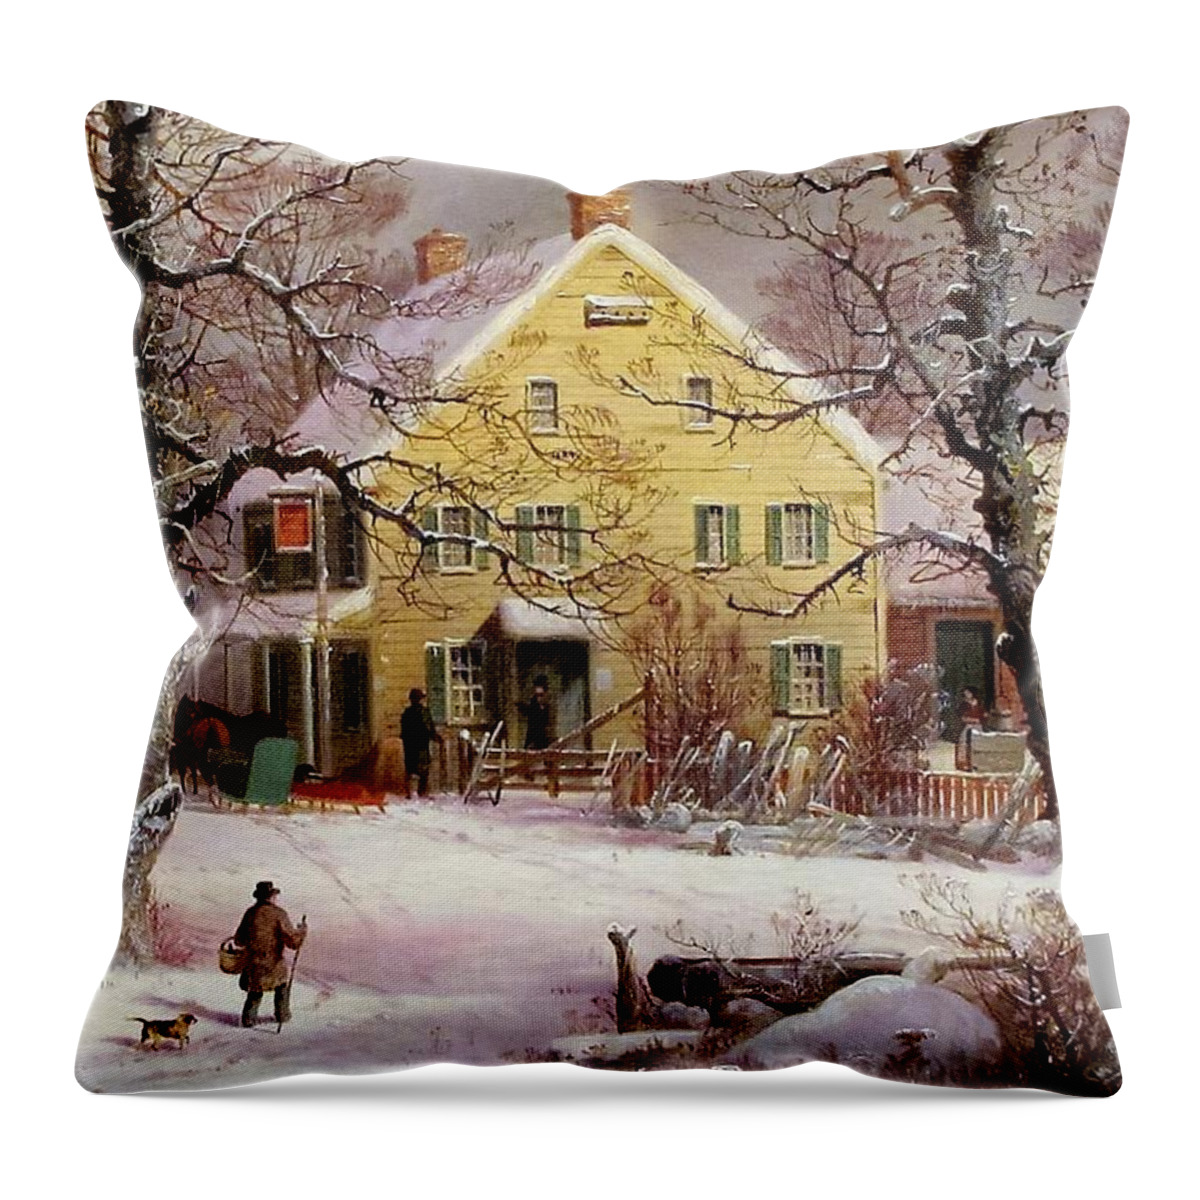 Winter Throw Pillow featuring the painting Winter Snow Scene by Currier and Ives